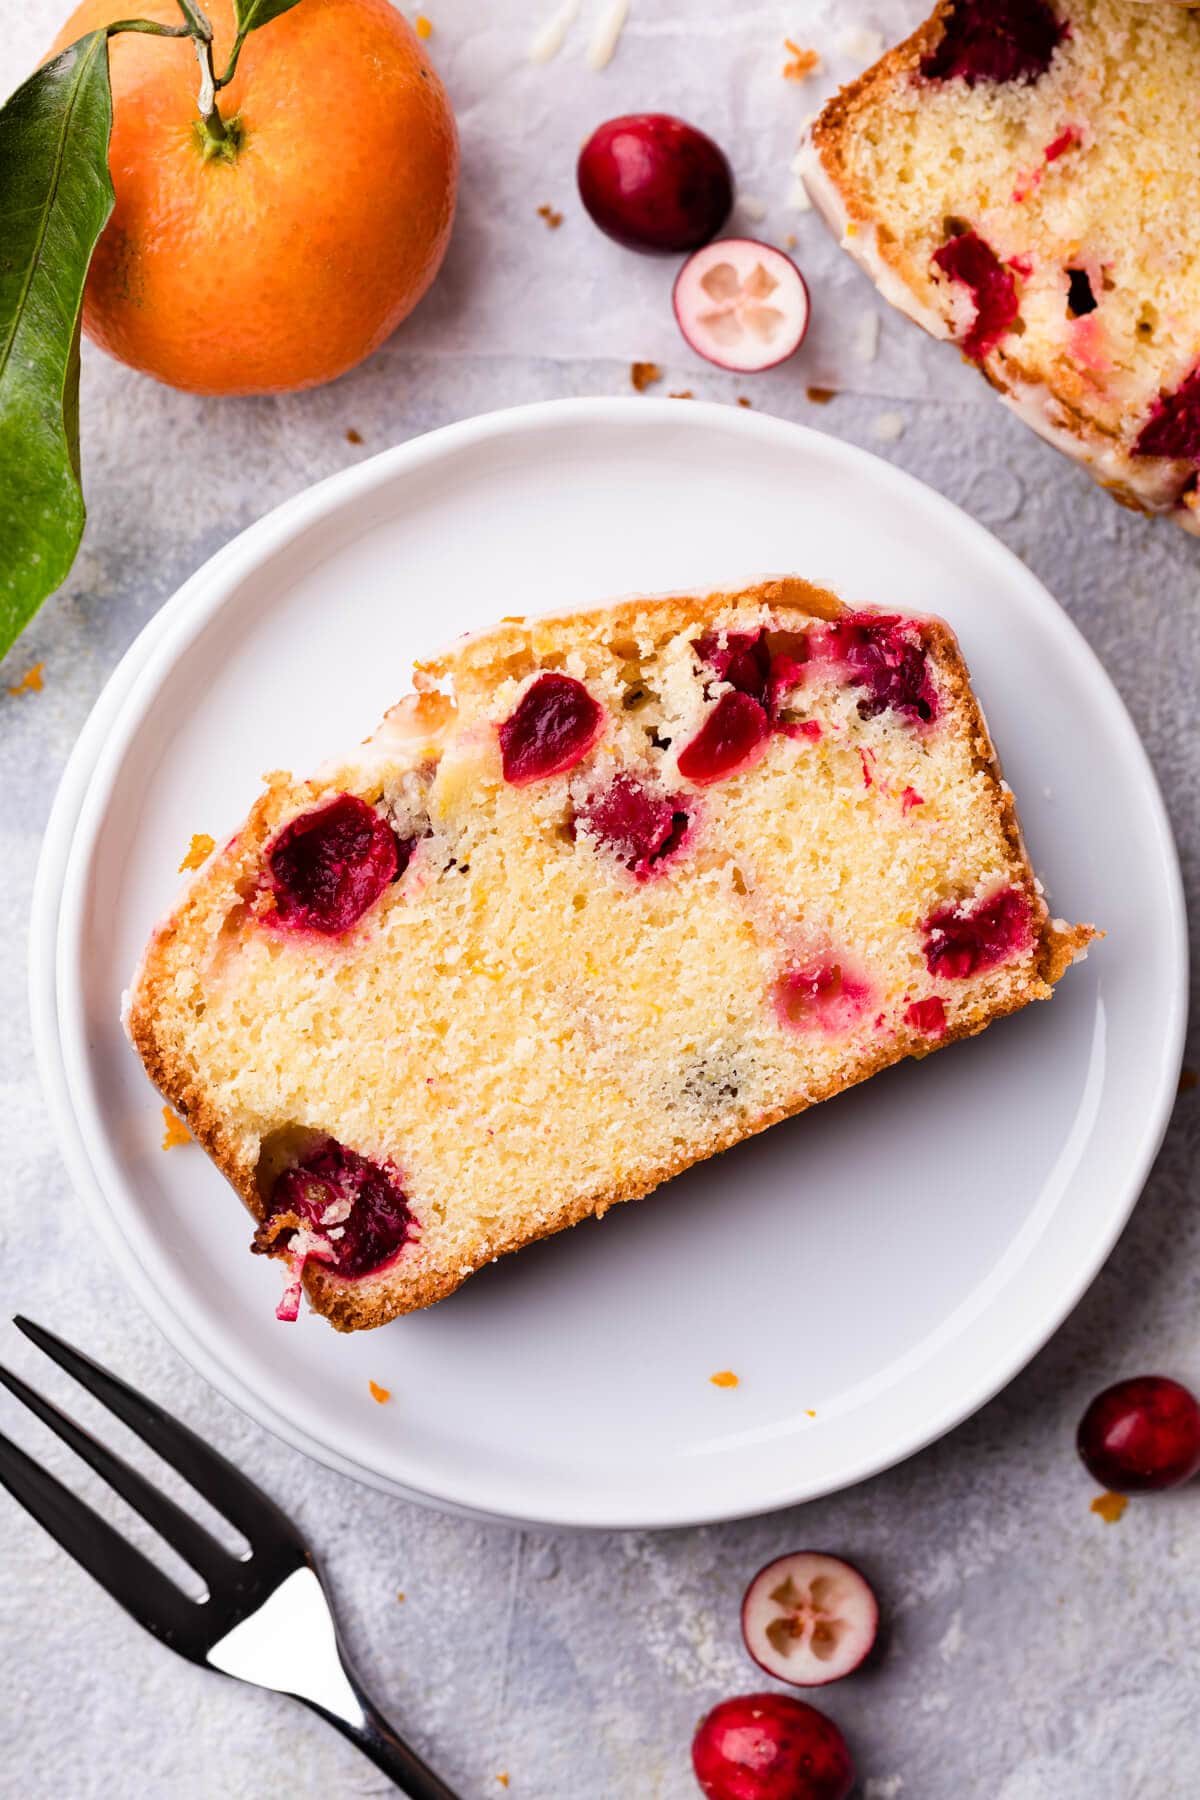 a single slice of the cranberry orange loaf on a white plate.